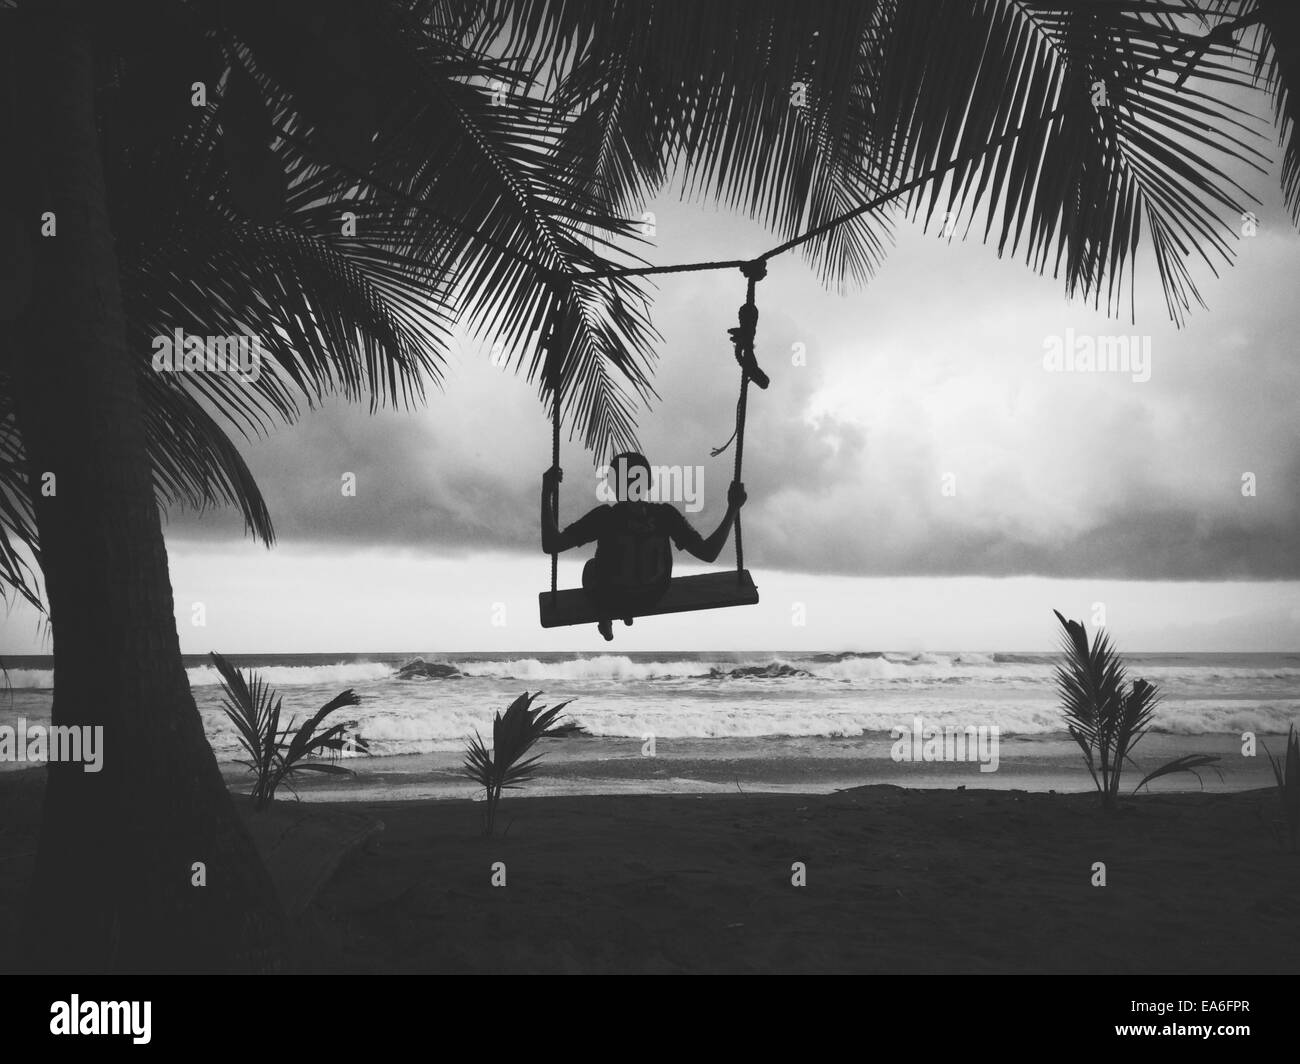 Silhouette of boy sitting on a swing on the beach Stock Photo